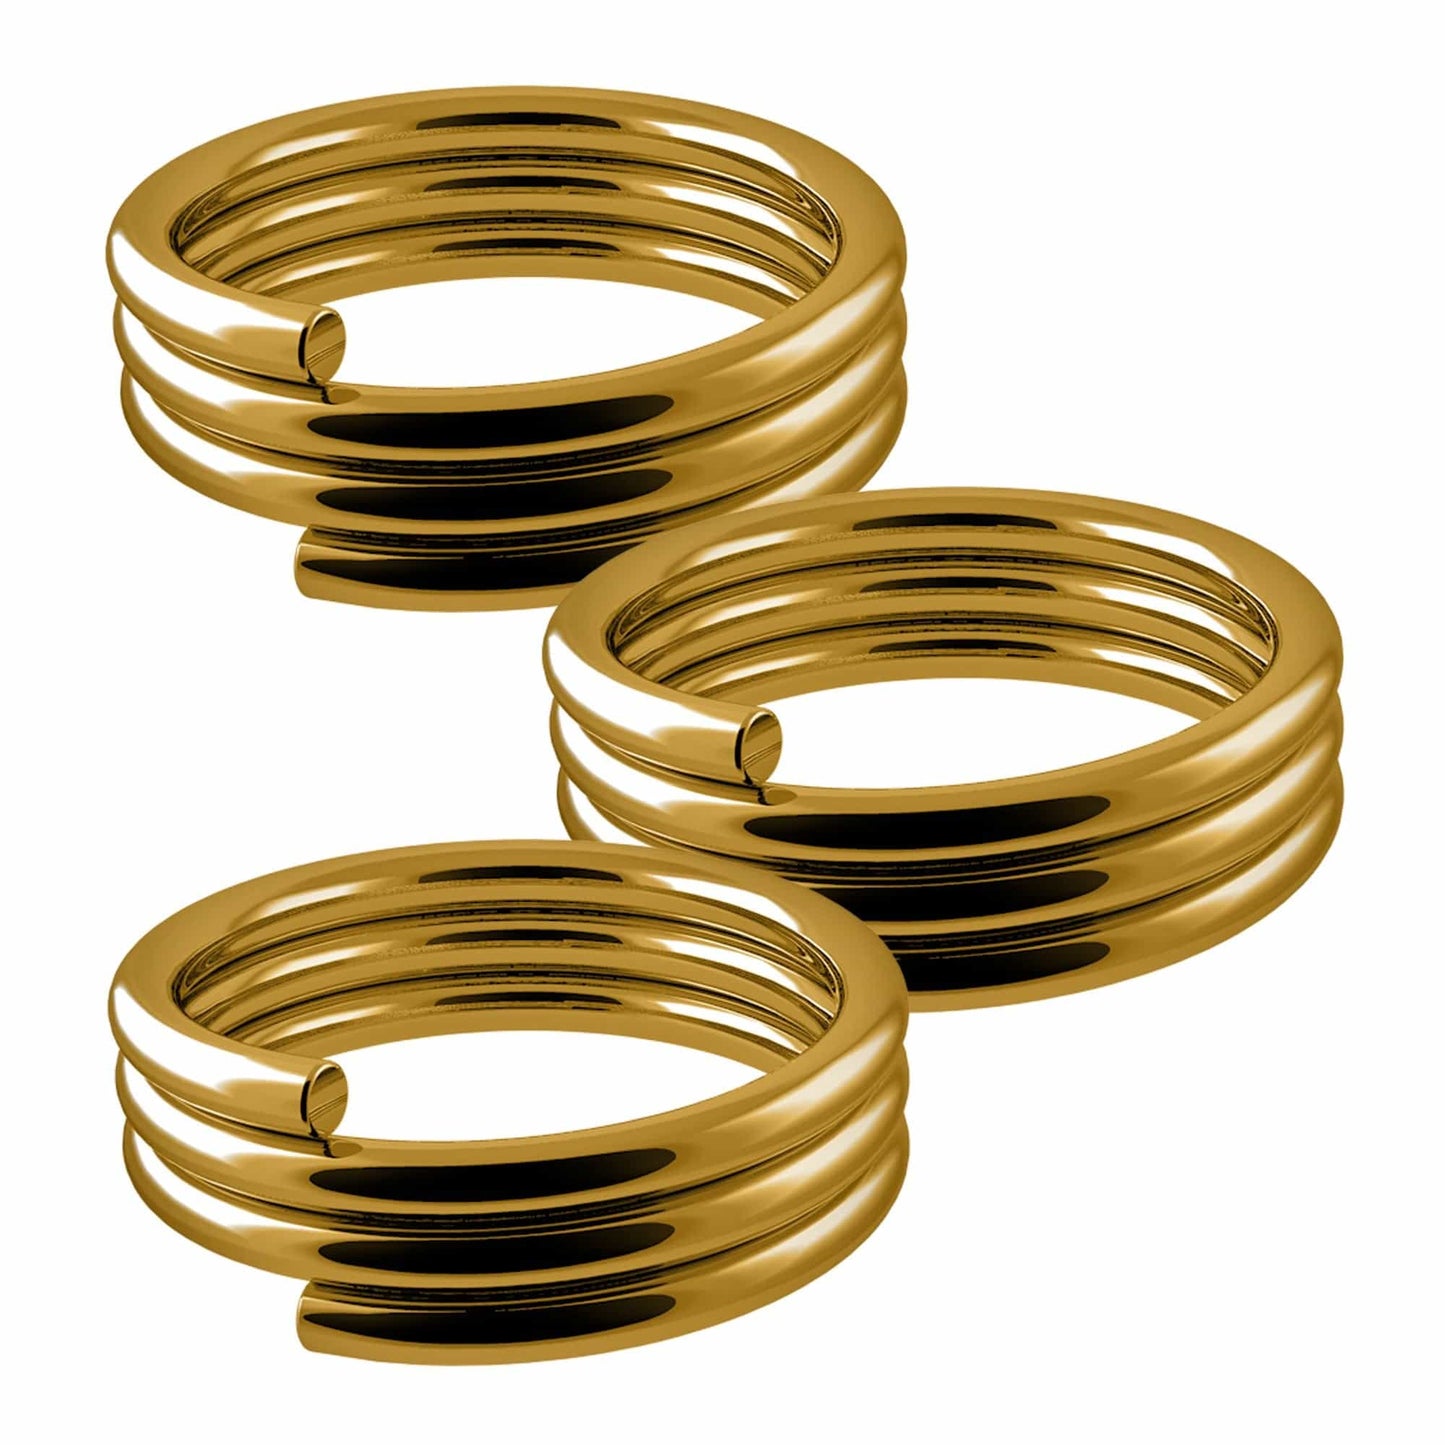 Designa Springs - for use with Nylon Shafts - 1 Set (3) Gold